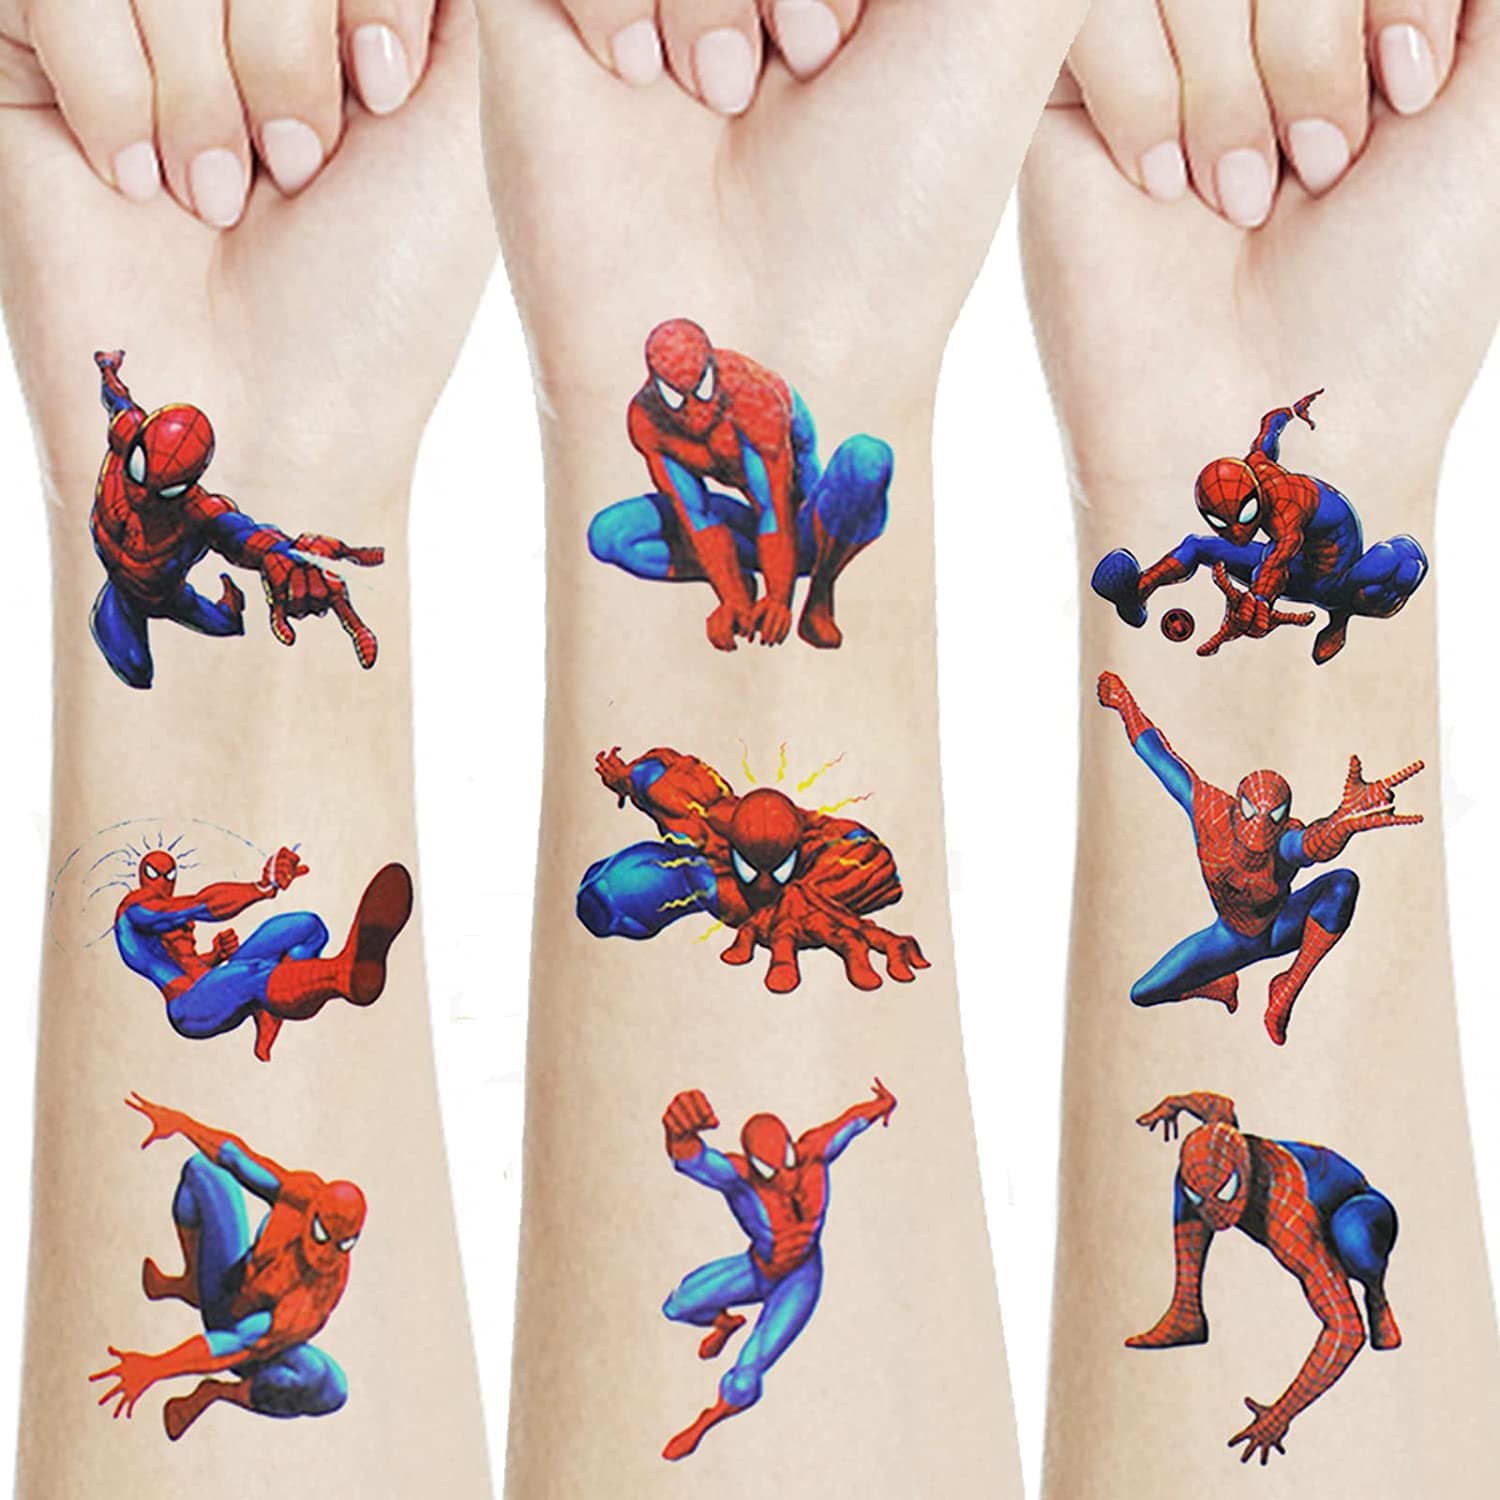 12 Sheets Spider-Man Temporary Tattoos Birthday Themed Party Supplies Decoration Favors Cartoon Cute Sticker Tattoos Gift for Kids Boys Girls Home Activity Class Prizes Carnival Christmas Rewards